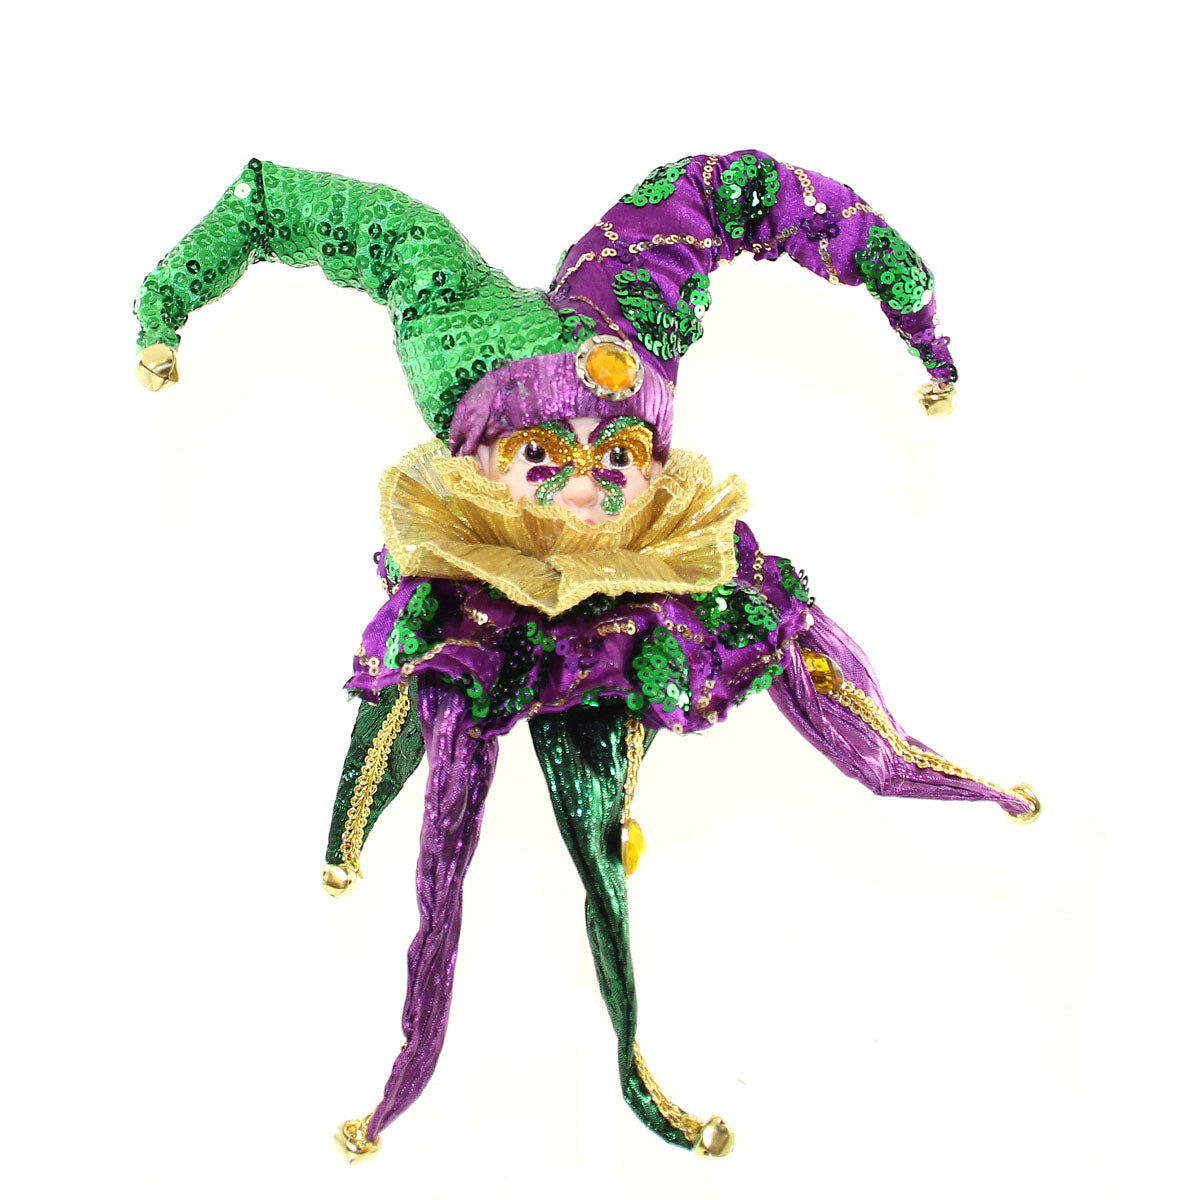 Hanging Jester Ornament-16"